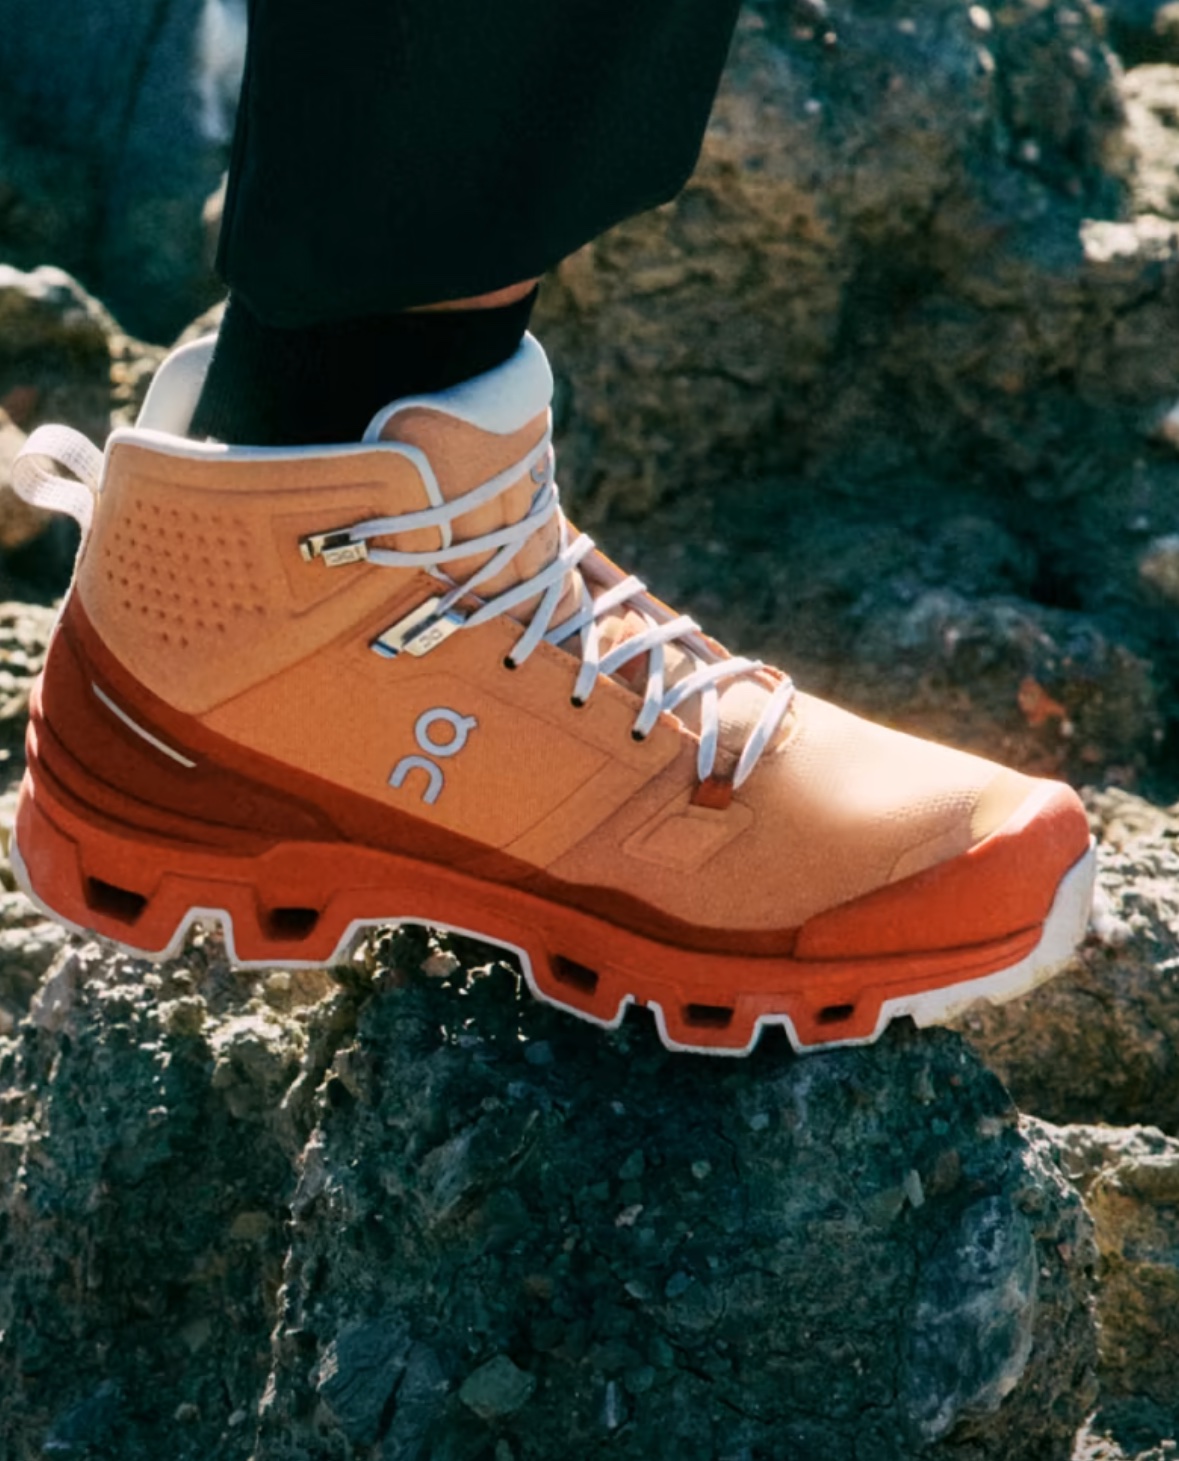 A model wearing an orange On hiking boot stepping over rocks.